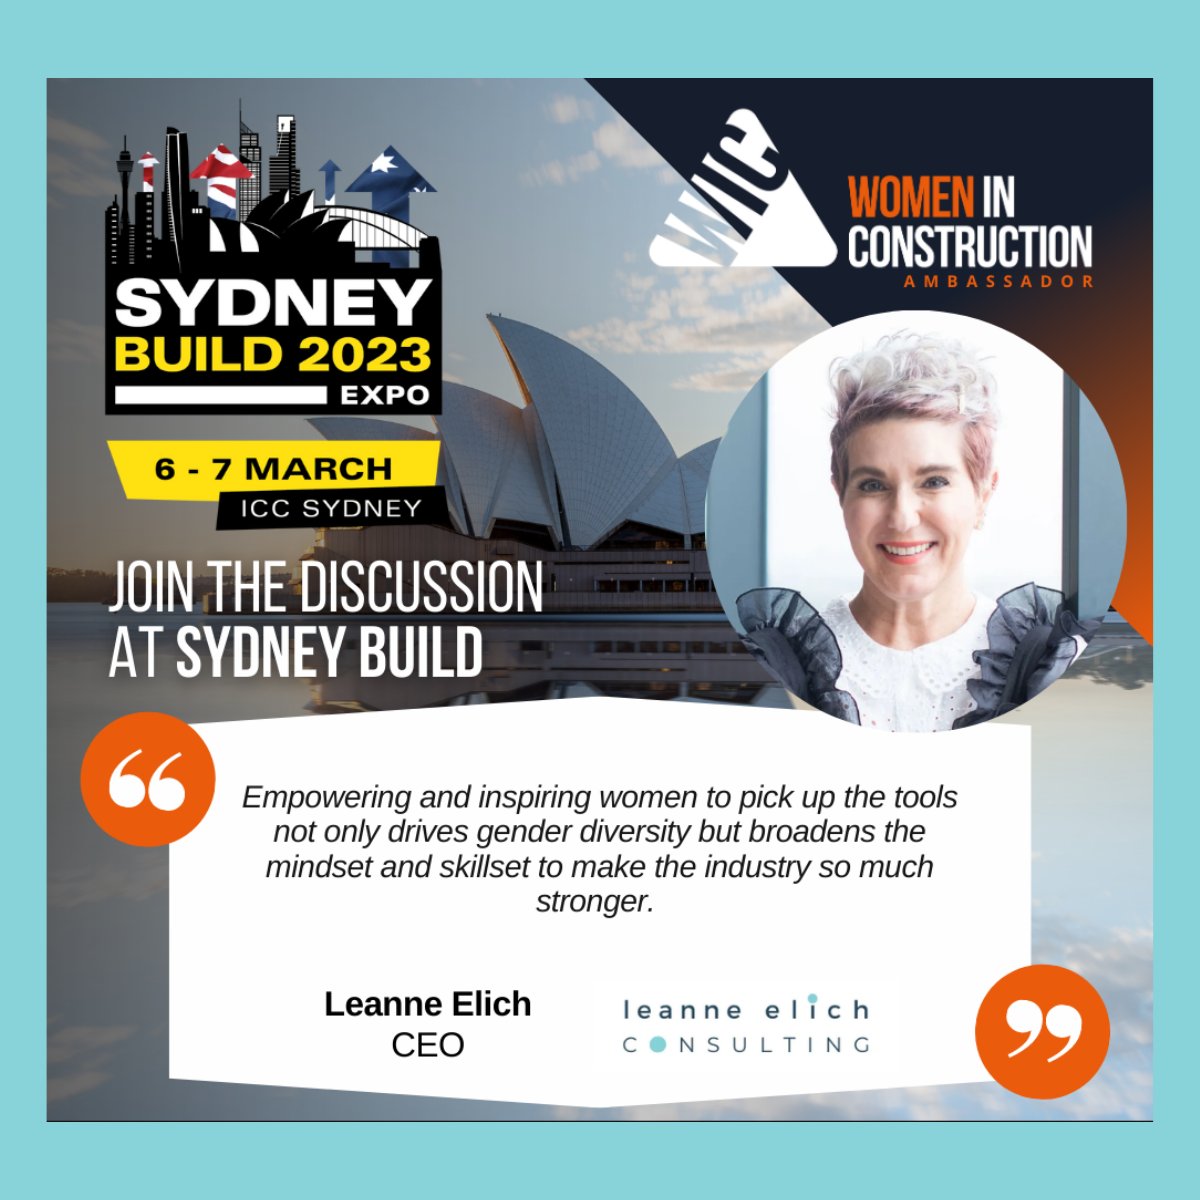 Join me today at Sydney Build EXPO 2023 at ICC Sydney! 👷‍♀️
As a proud Women in Construction Ambassador, I will be attending Sydney Build supporting women in construction and trades.

#sydneybuild #womeninconstruction #ewit #womensnetworkaustralia